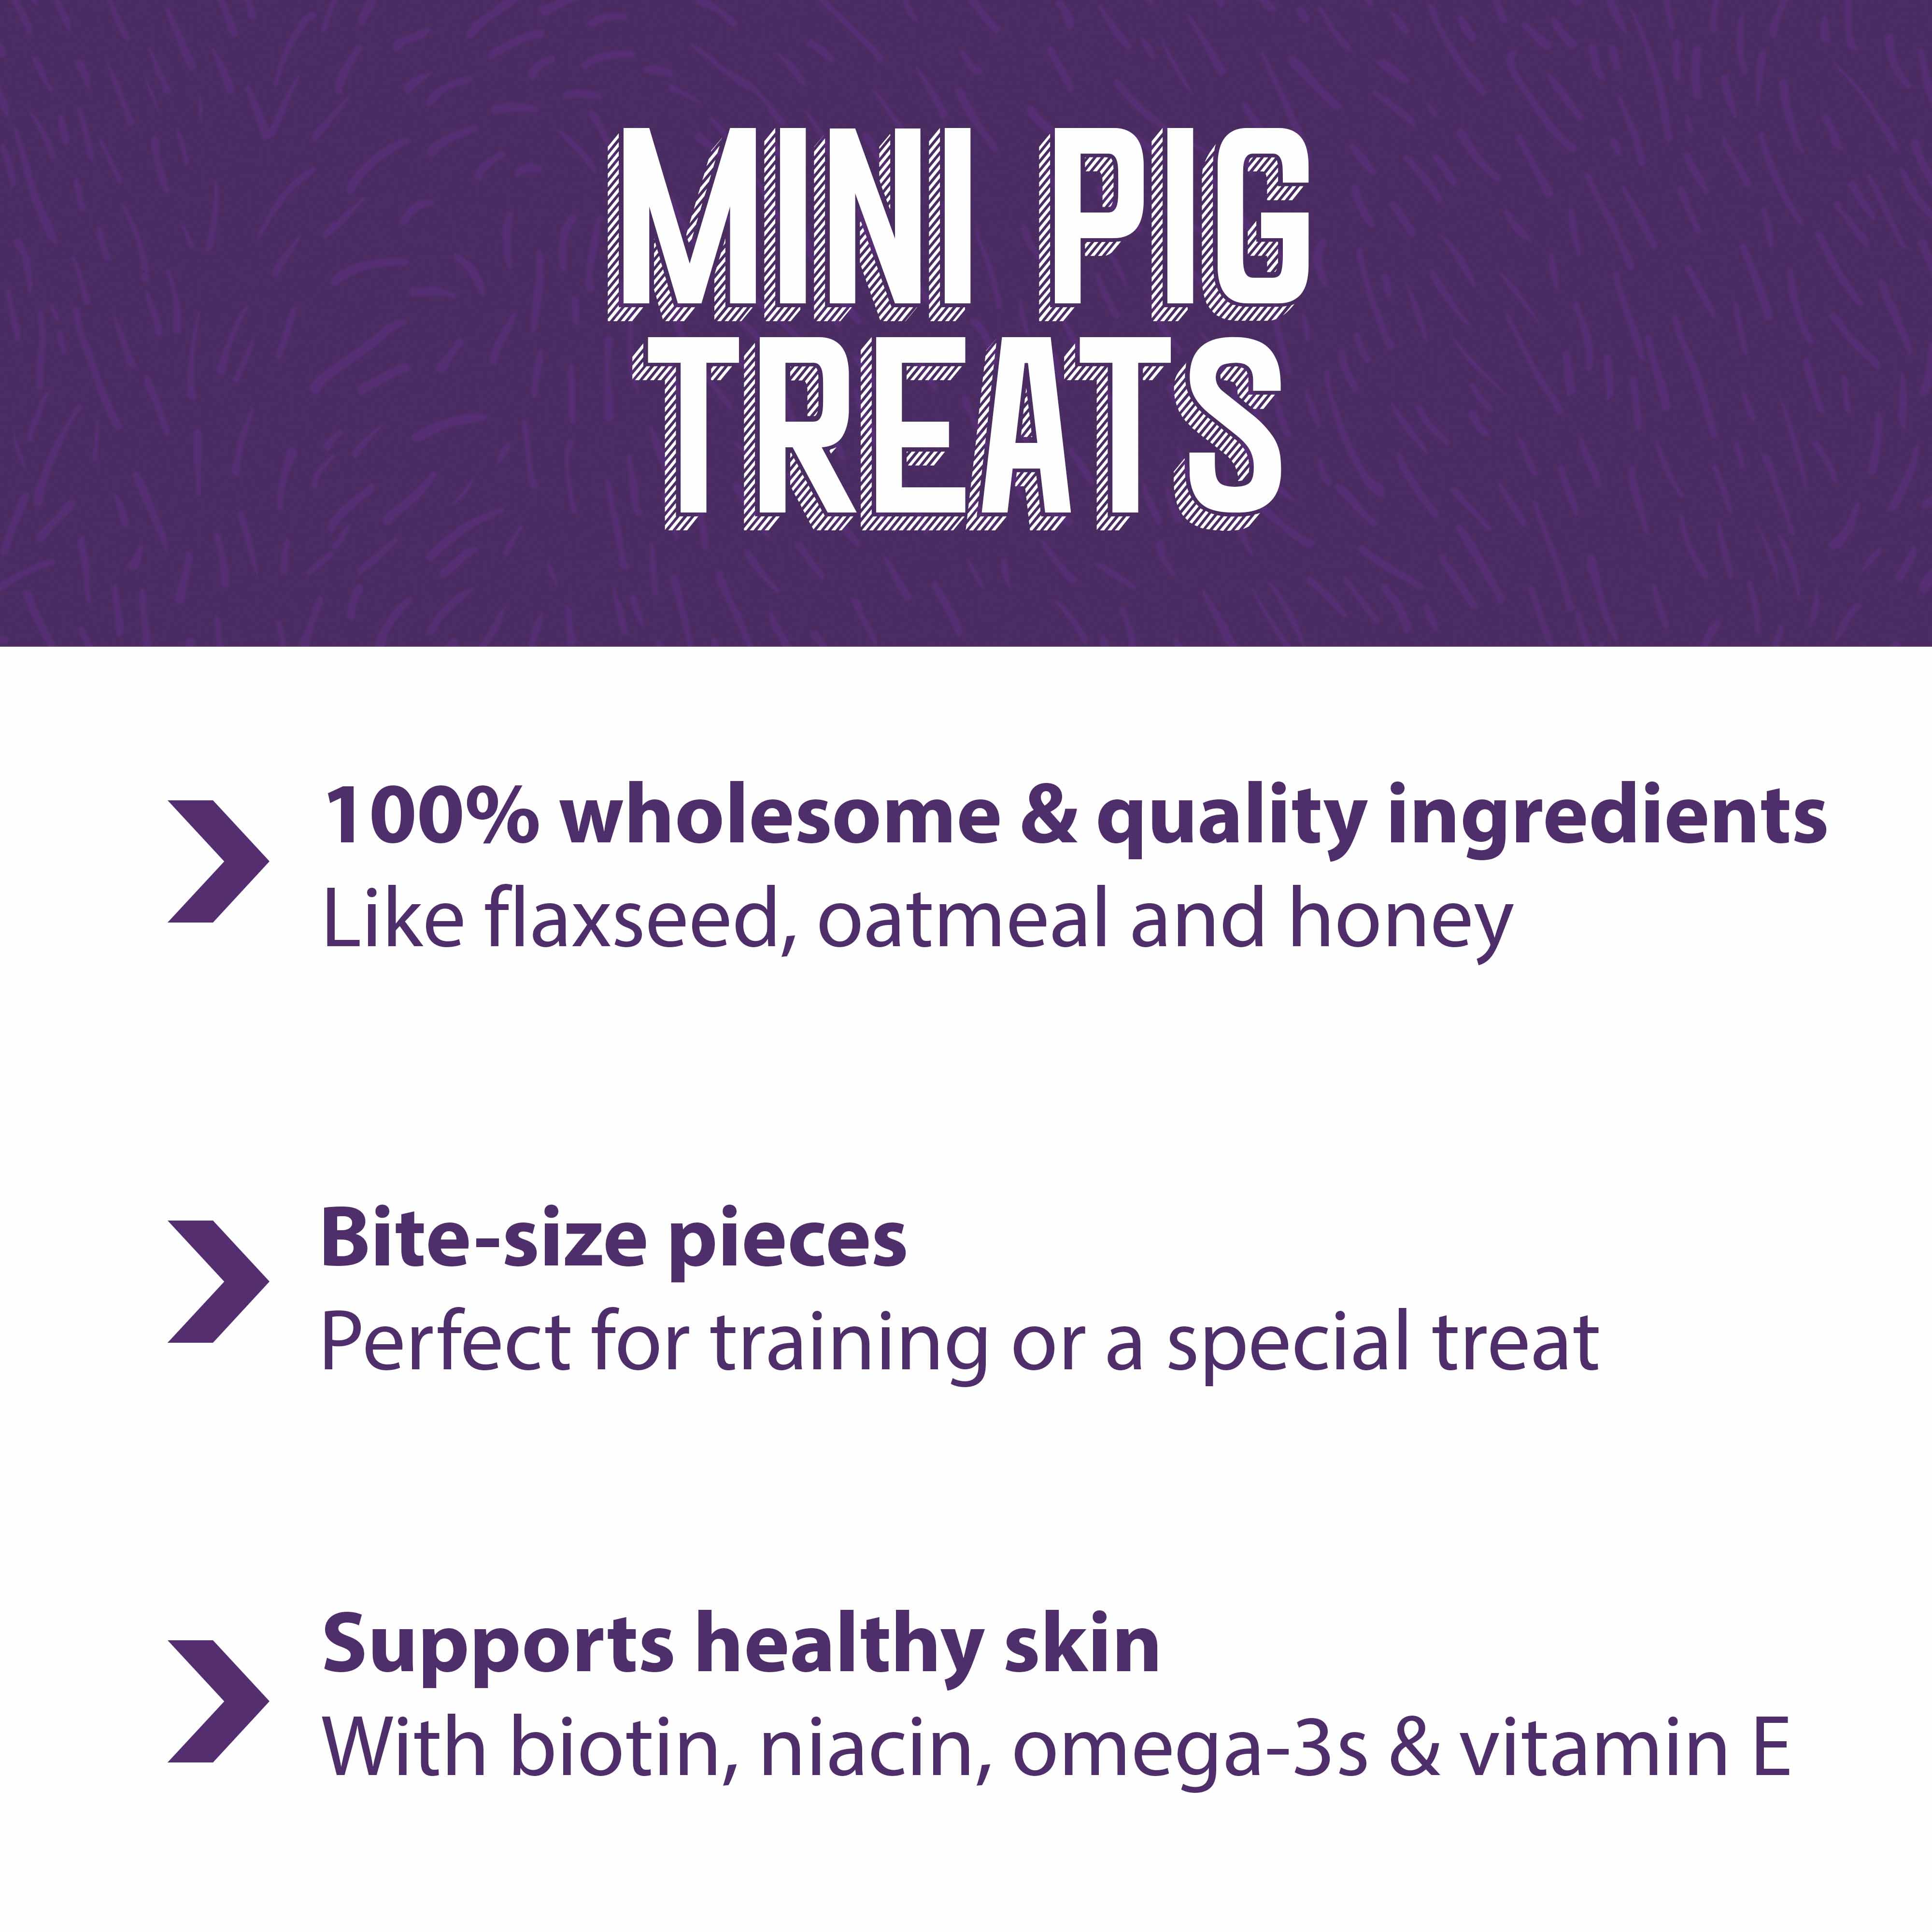 Mini Pig treats are bite size pieces that are perfect for training